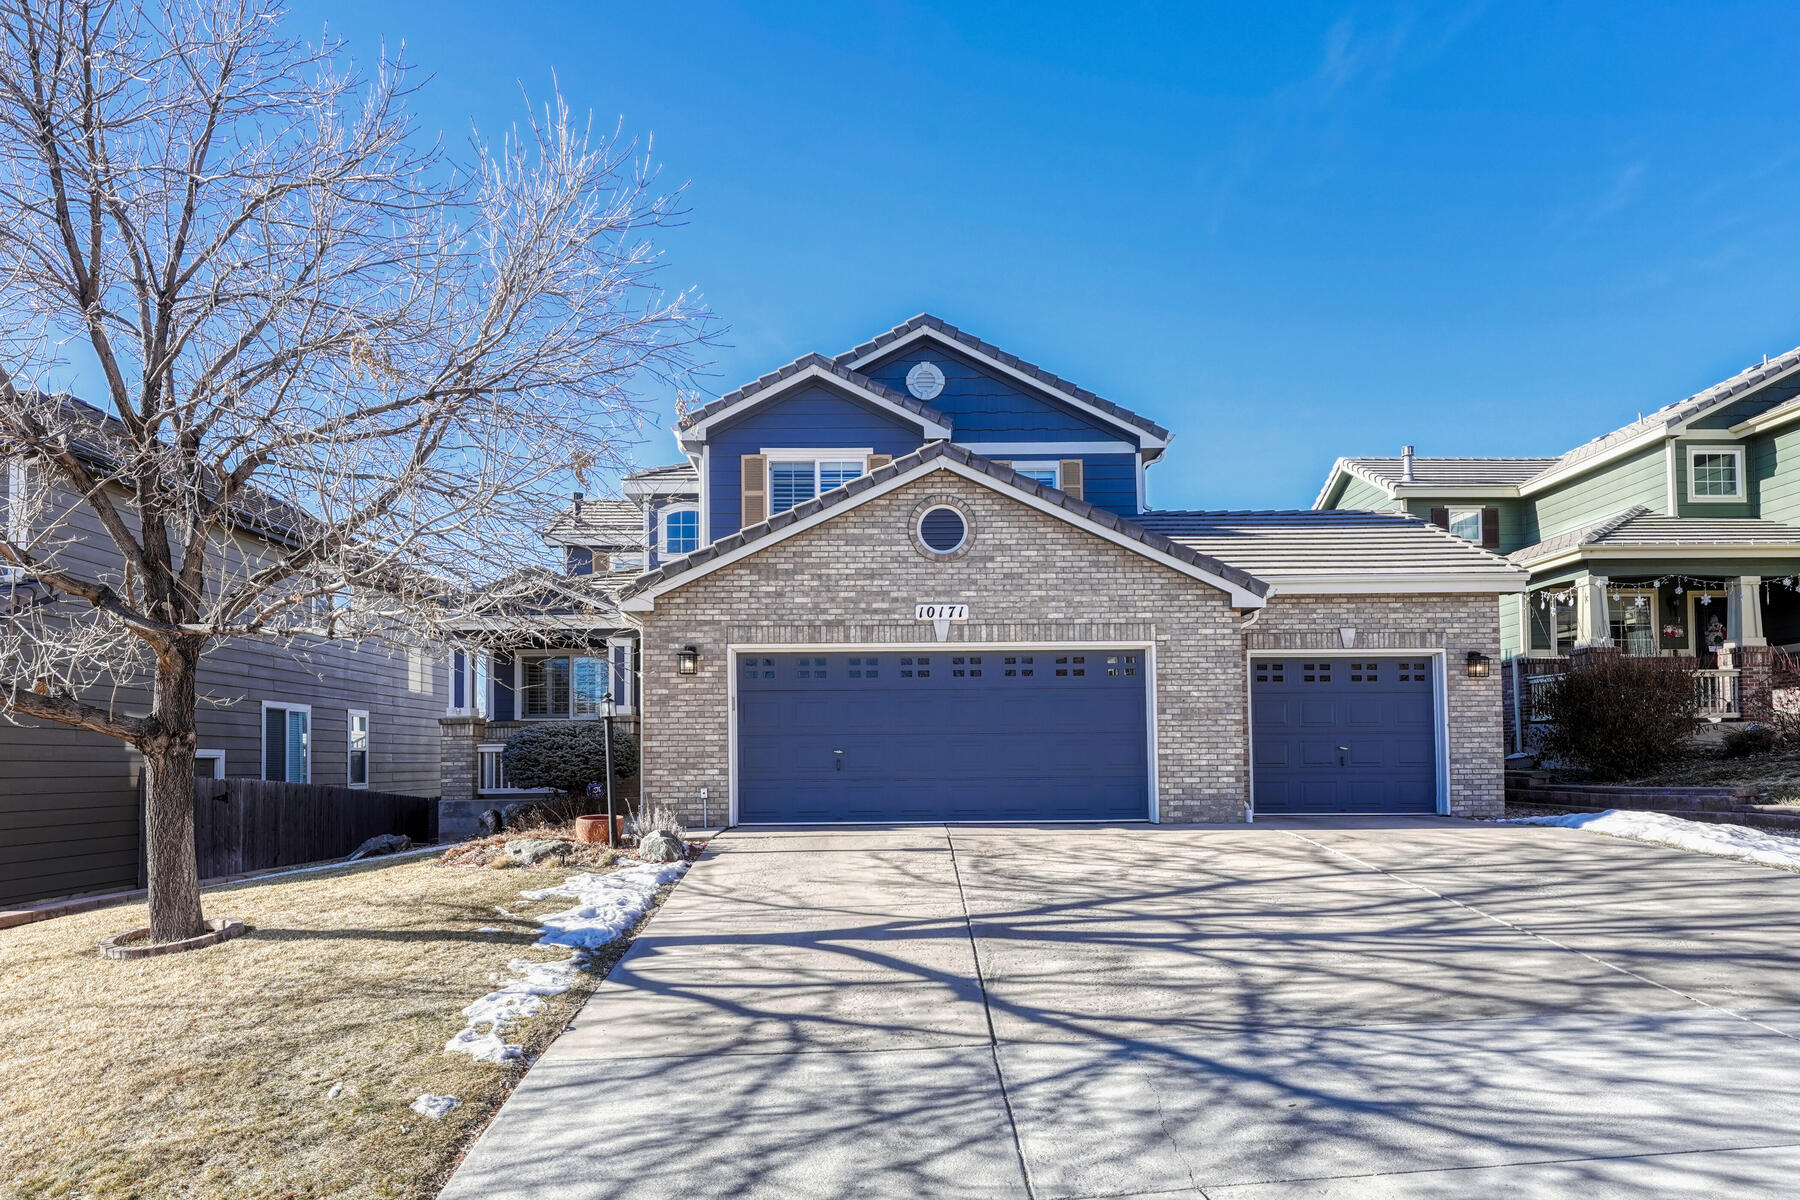 10171 PLYMOUTH COURT PARKER, CO 80134